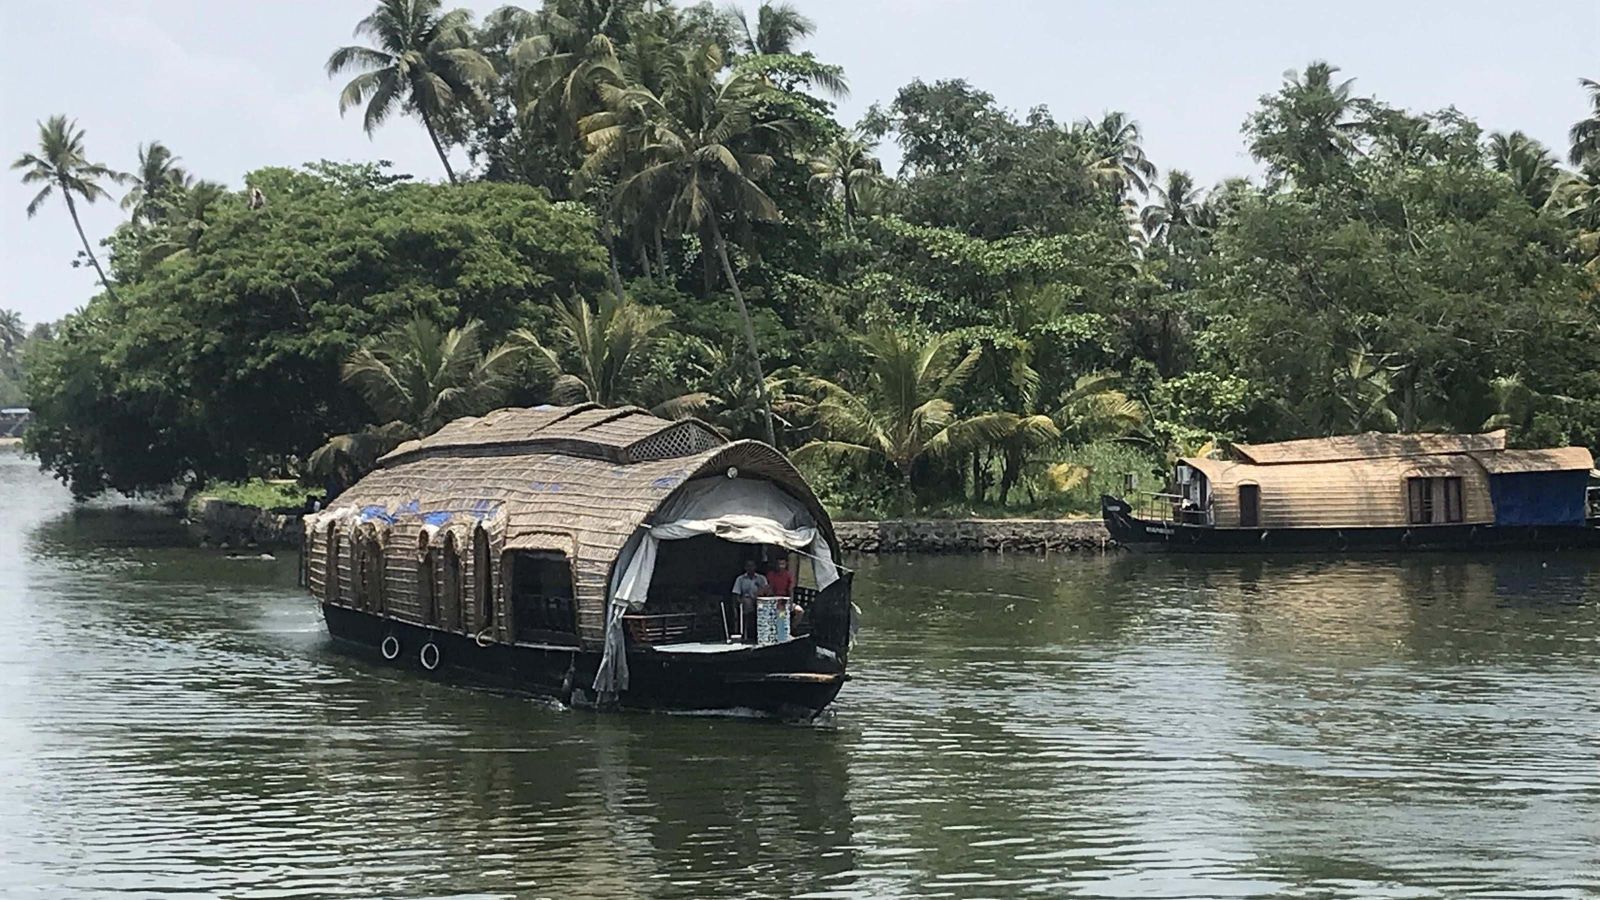 Houseboat on the canals of Alleppey, India